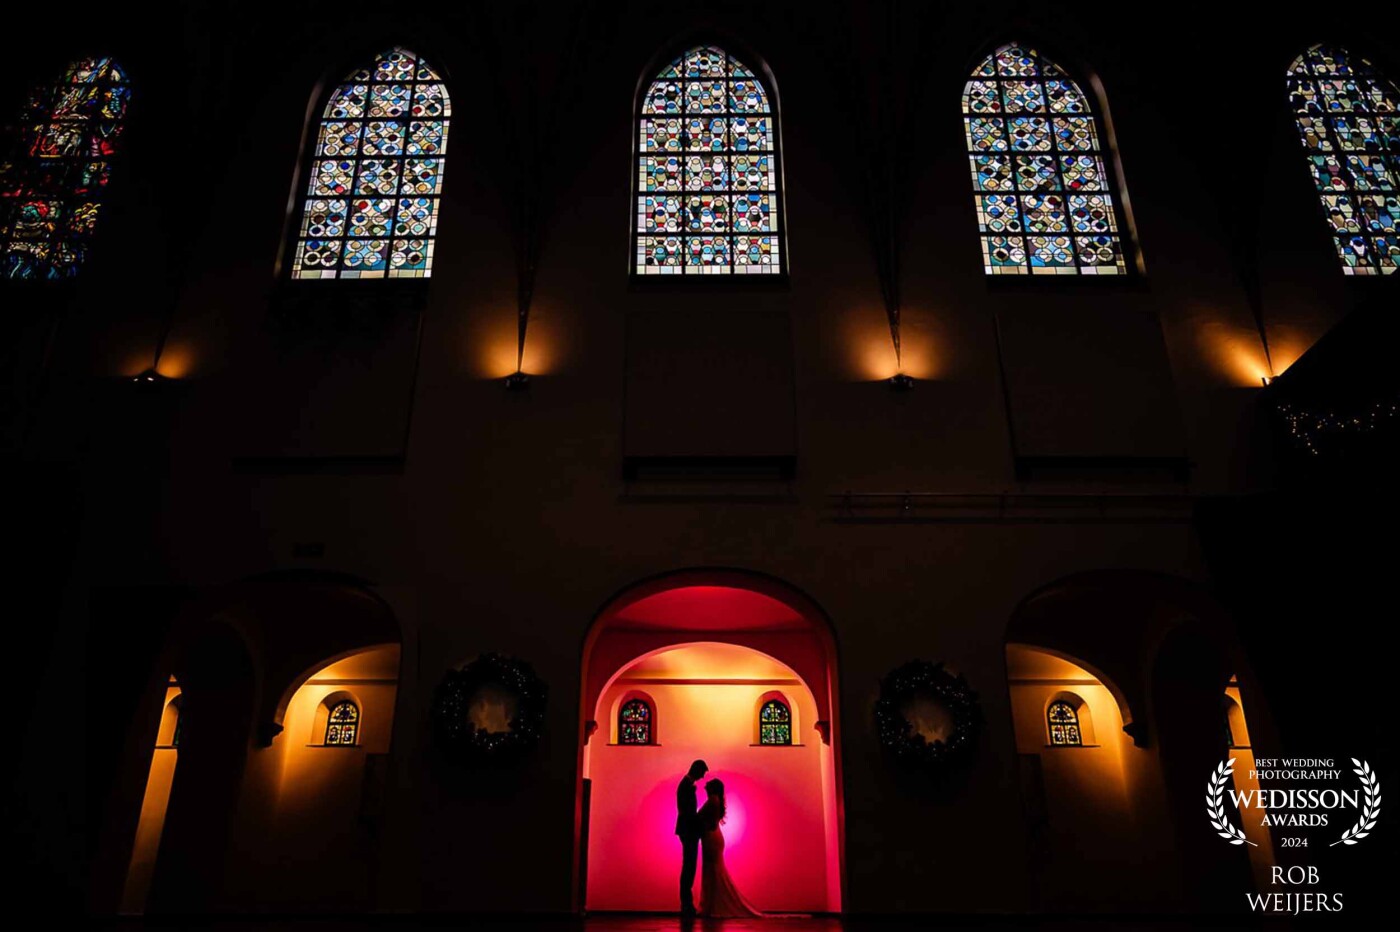 During a beautiful December wedding, we had to move to an indoor location due to the weather to take photos with the bridal couple. Fortunately, we have plenty of those in Venlo. I regularly visit this location to photograph weddings. The light from outside that shines through the stained glass already created a beautiful atmosphere, but adding a little magic completed the image.